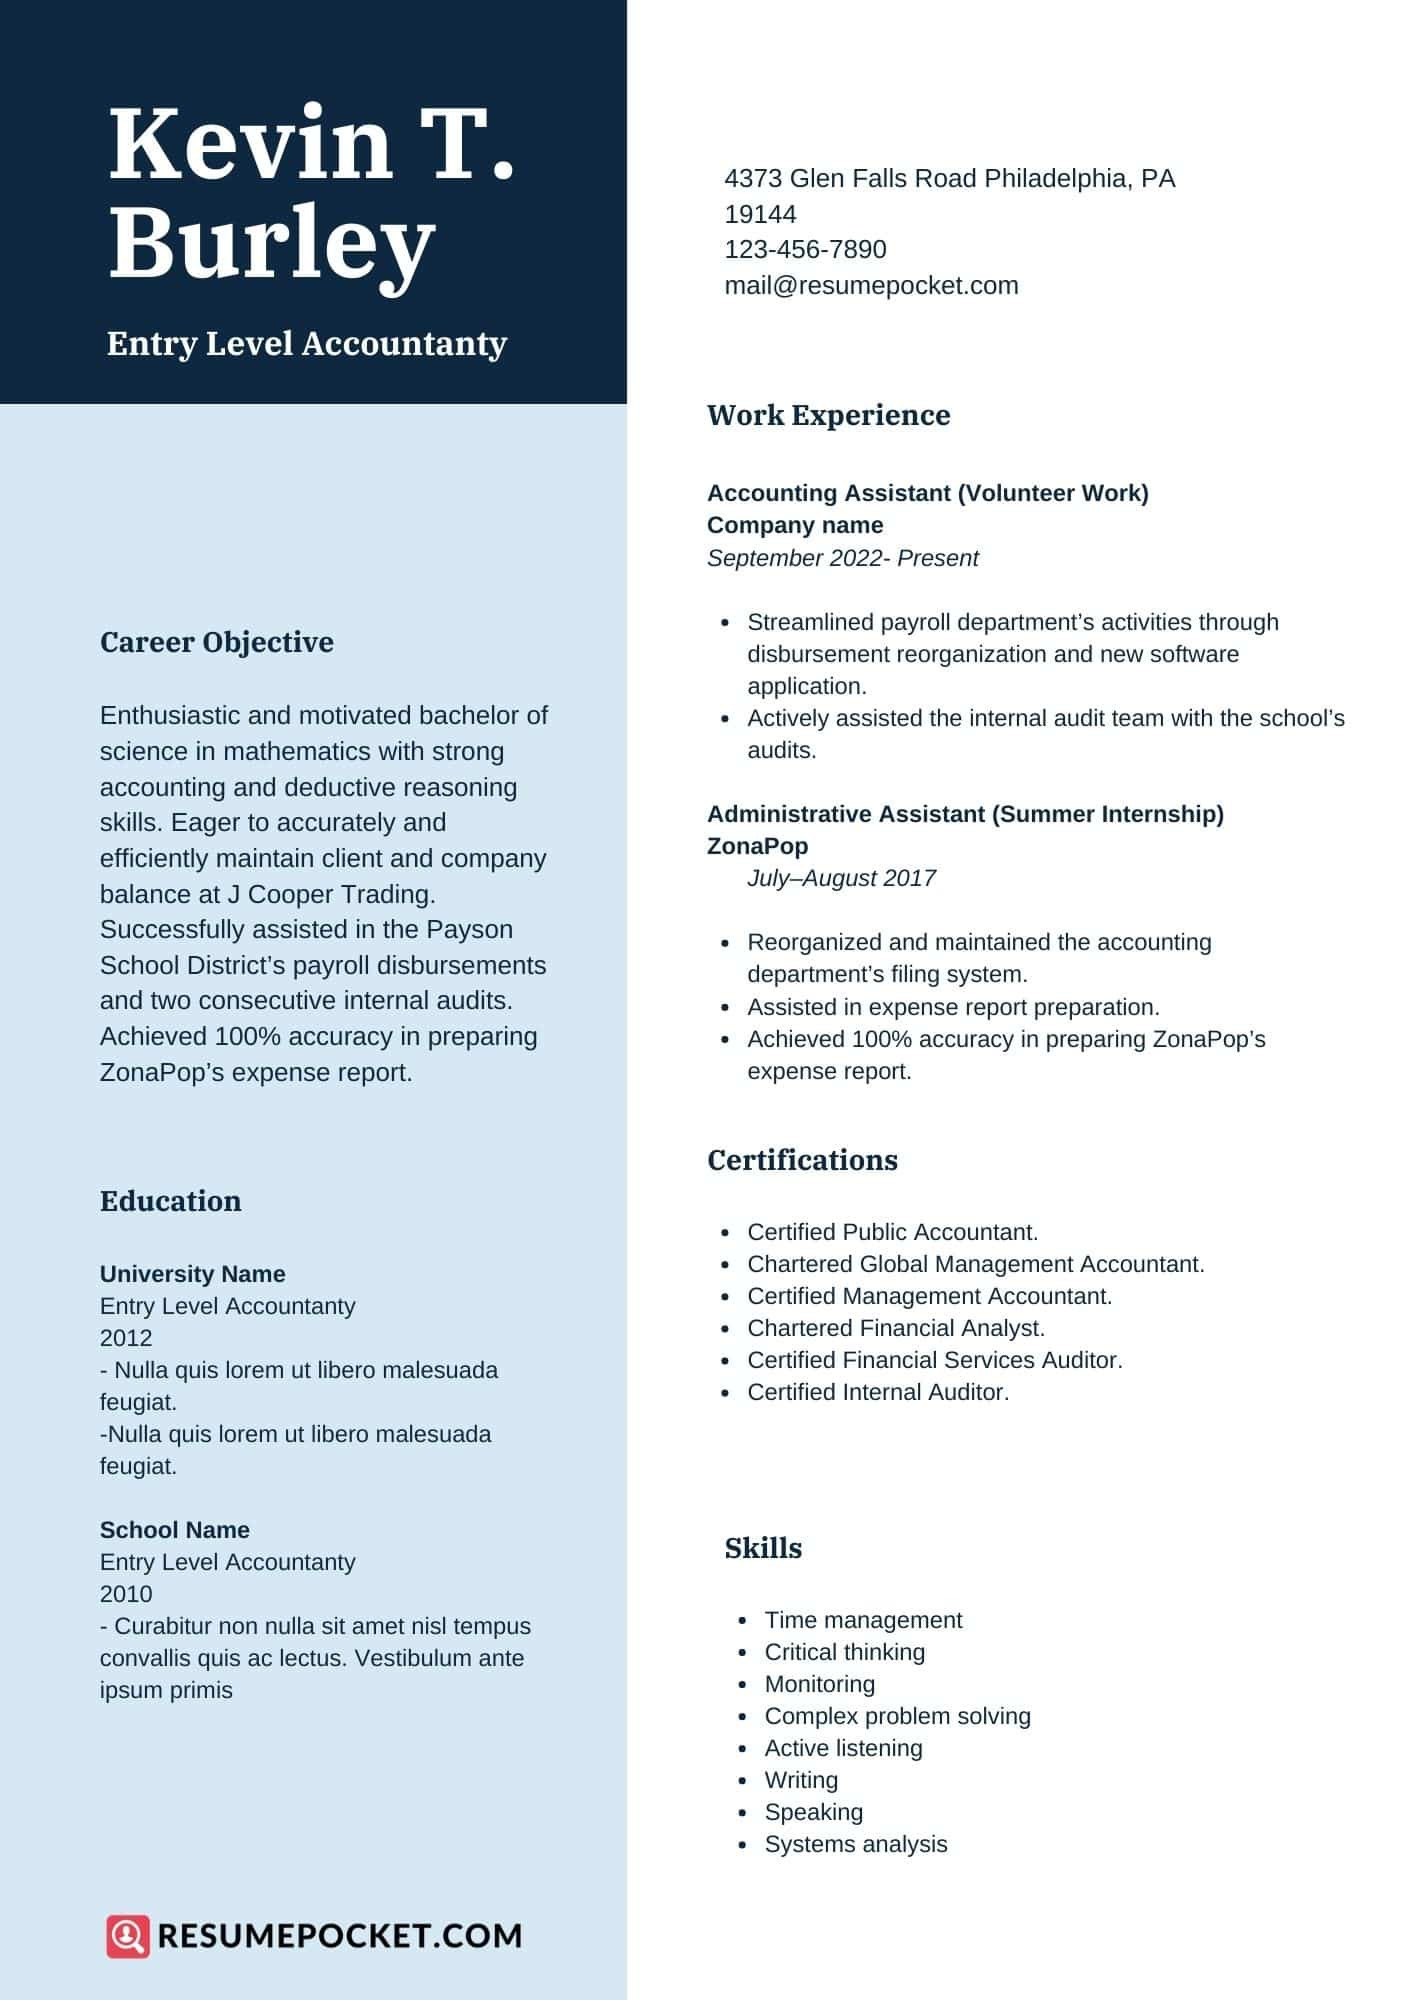 Entry Level Tax Accountant Resume Sample Entry Level Accountant Resume Samples – Resumepocket